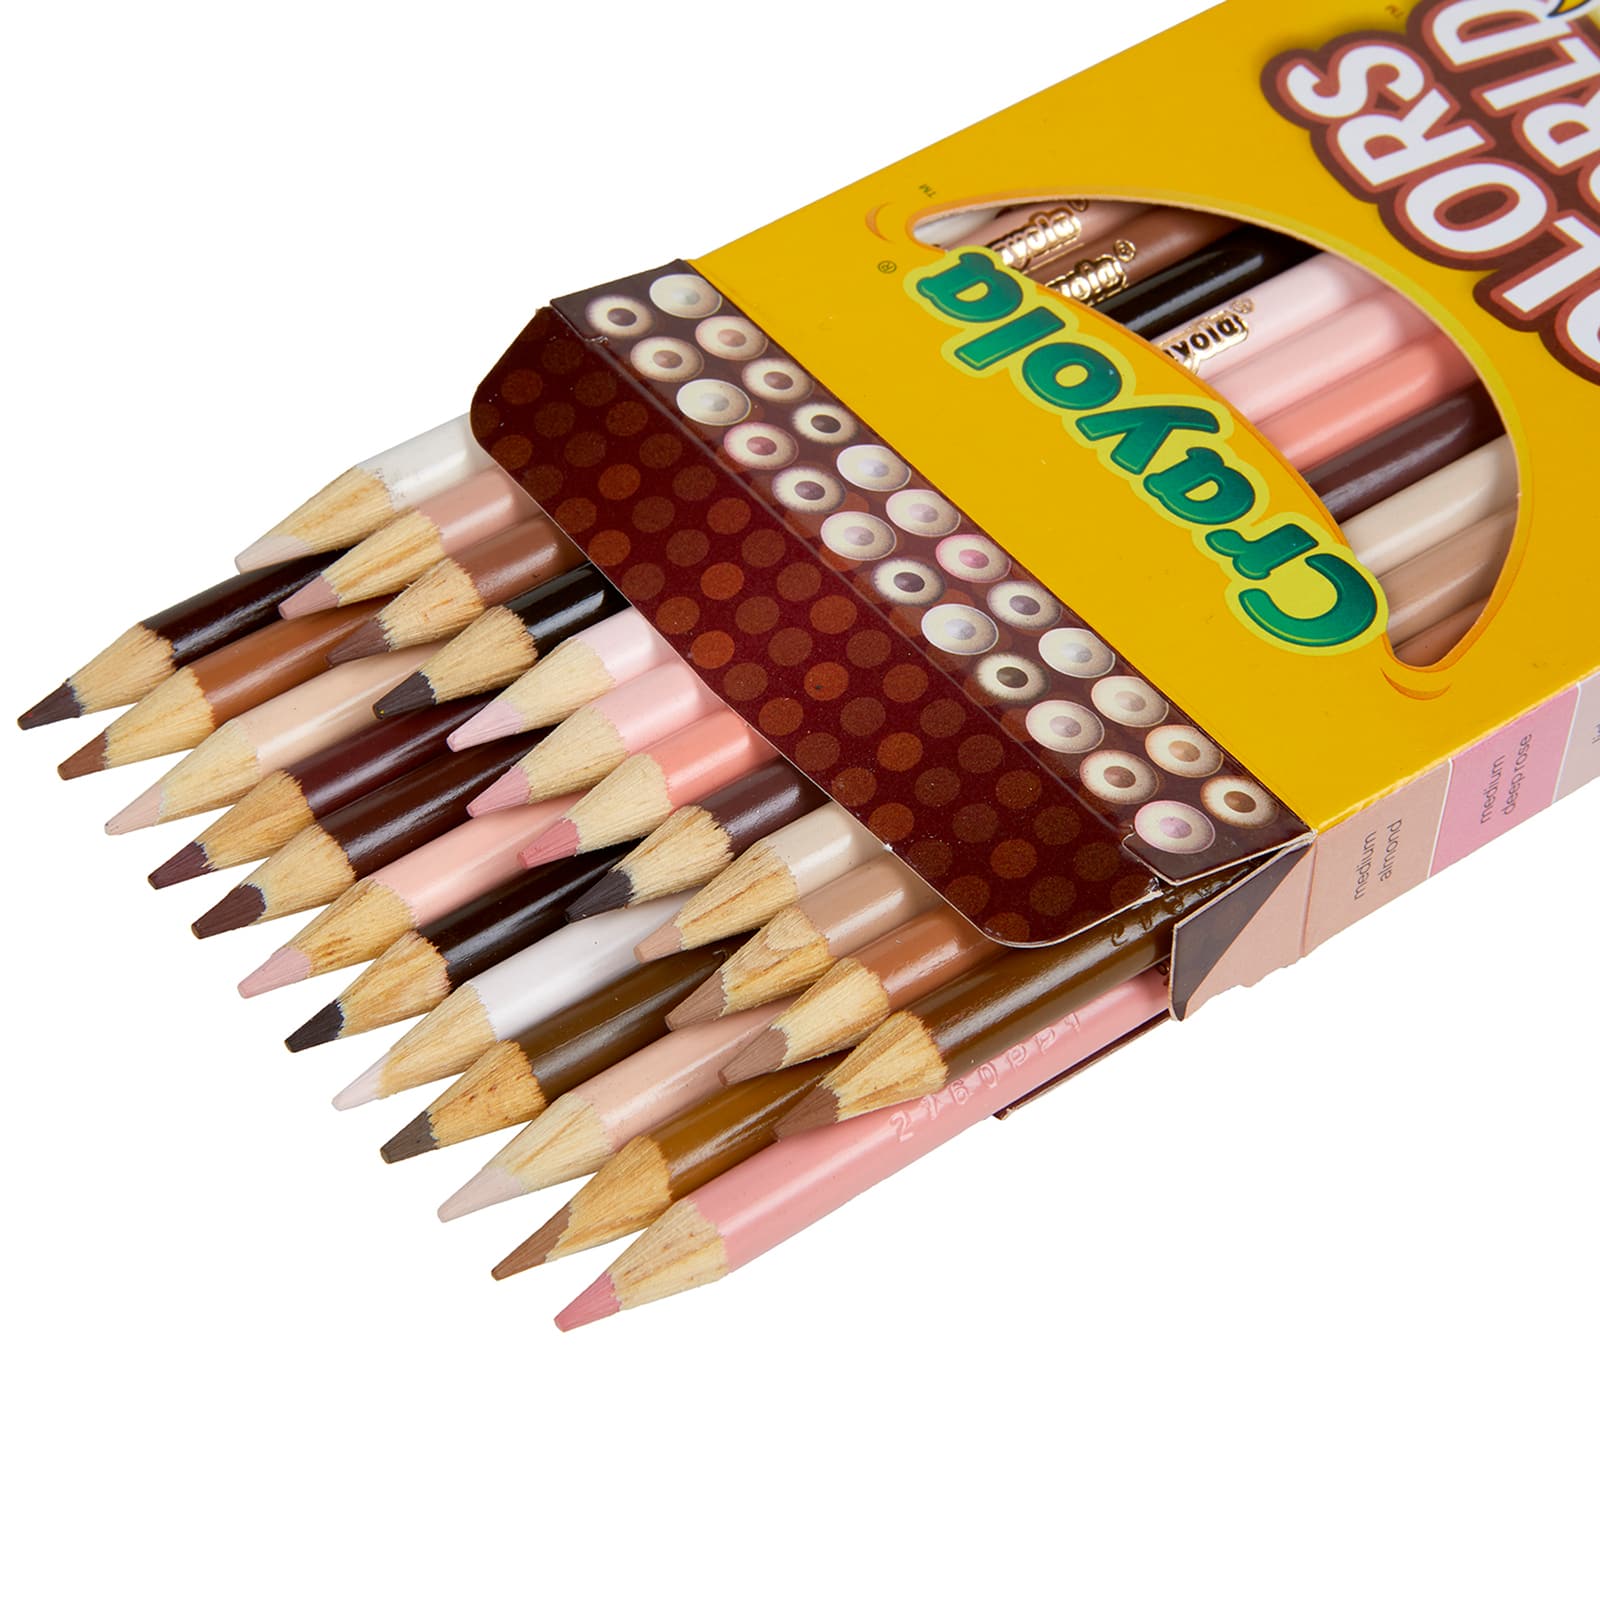 Crayola&#xAE; 3 Pack Colors of the World Colored Pencils, 24ct.